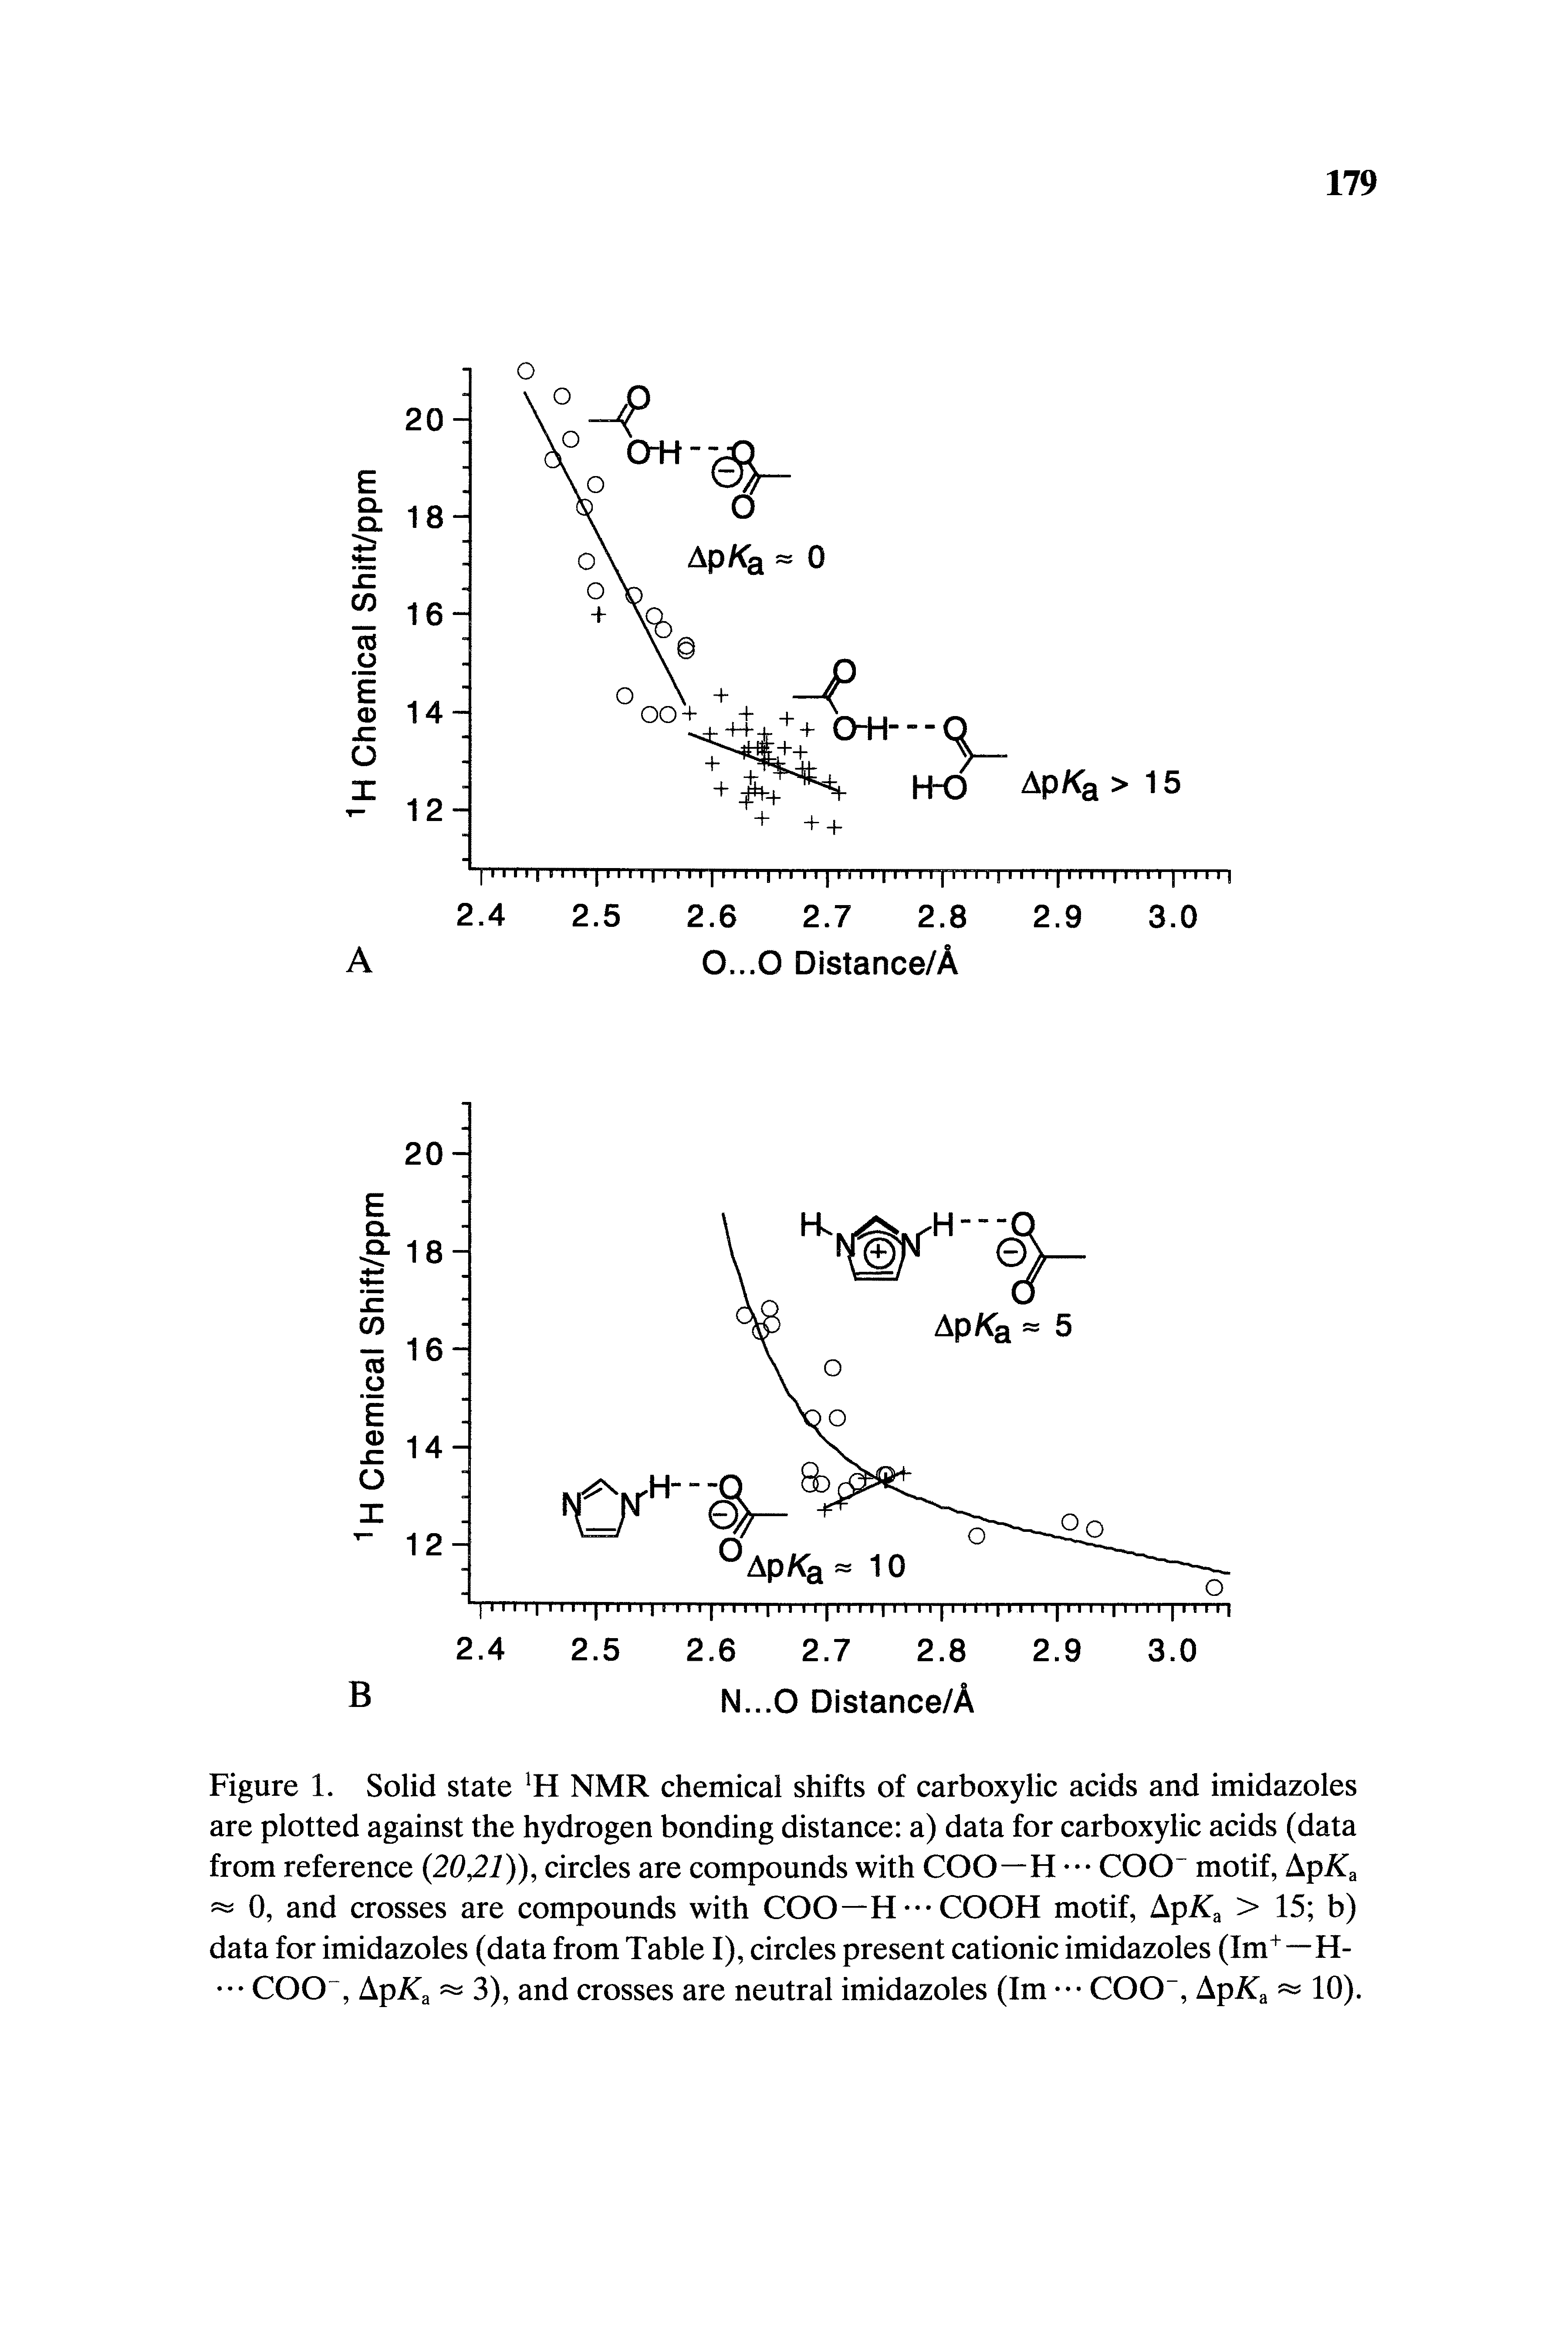 Figure 1. Solid state NMR chemical shifts of carboxylic acids and imidazoles are plotted against the hydrogen bonding distance a) data for carboxylic acids (data from reference (2021)), circles are compounds with COO—H COO motif, ApKa 0, and crosses are compounds with COO—H - COOH motif, Ap a > 15 b) data for imidazoles (data from Table I), circles present cationic imidazoles (Im+—H- COO , ApA a 3), and crosses are neutral imidazoles (Im COO , ApKa 10).